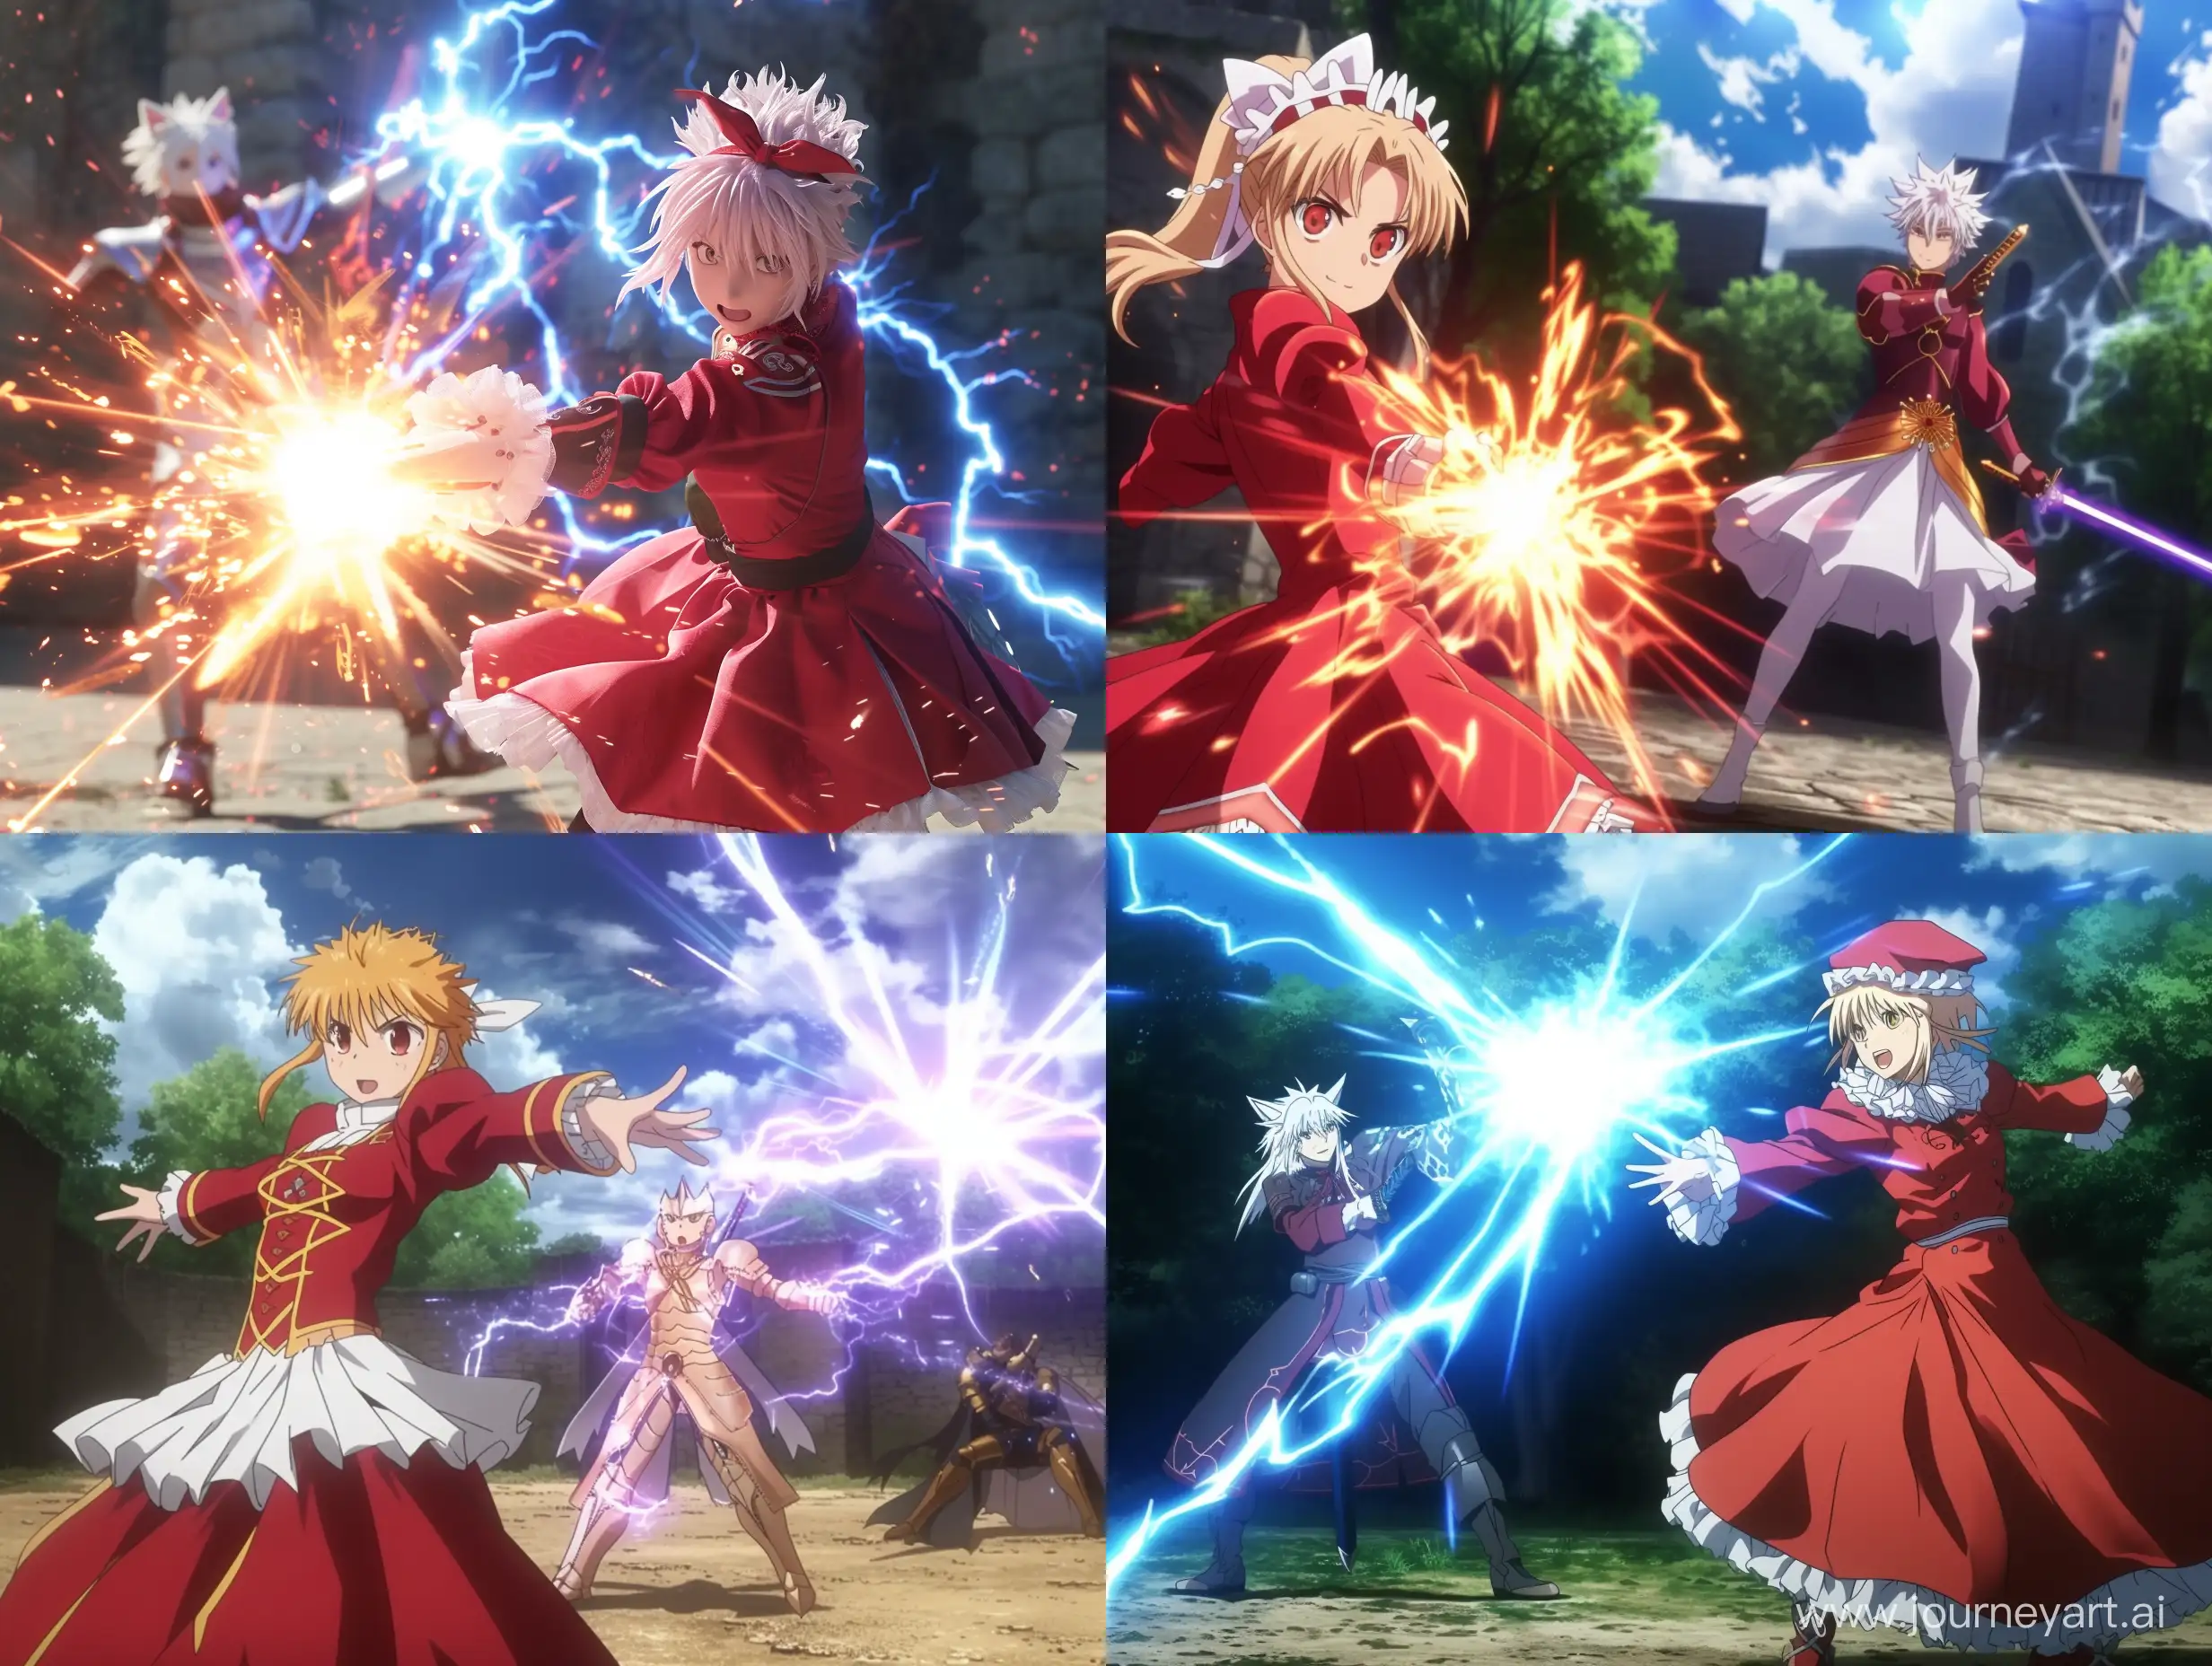 Shirou emiya dressed as a magical girl and emitting magical energy in front of Saber 